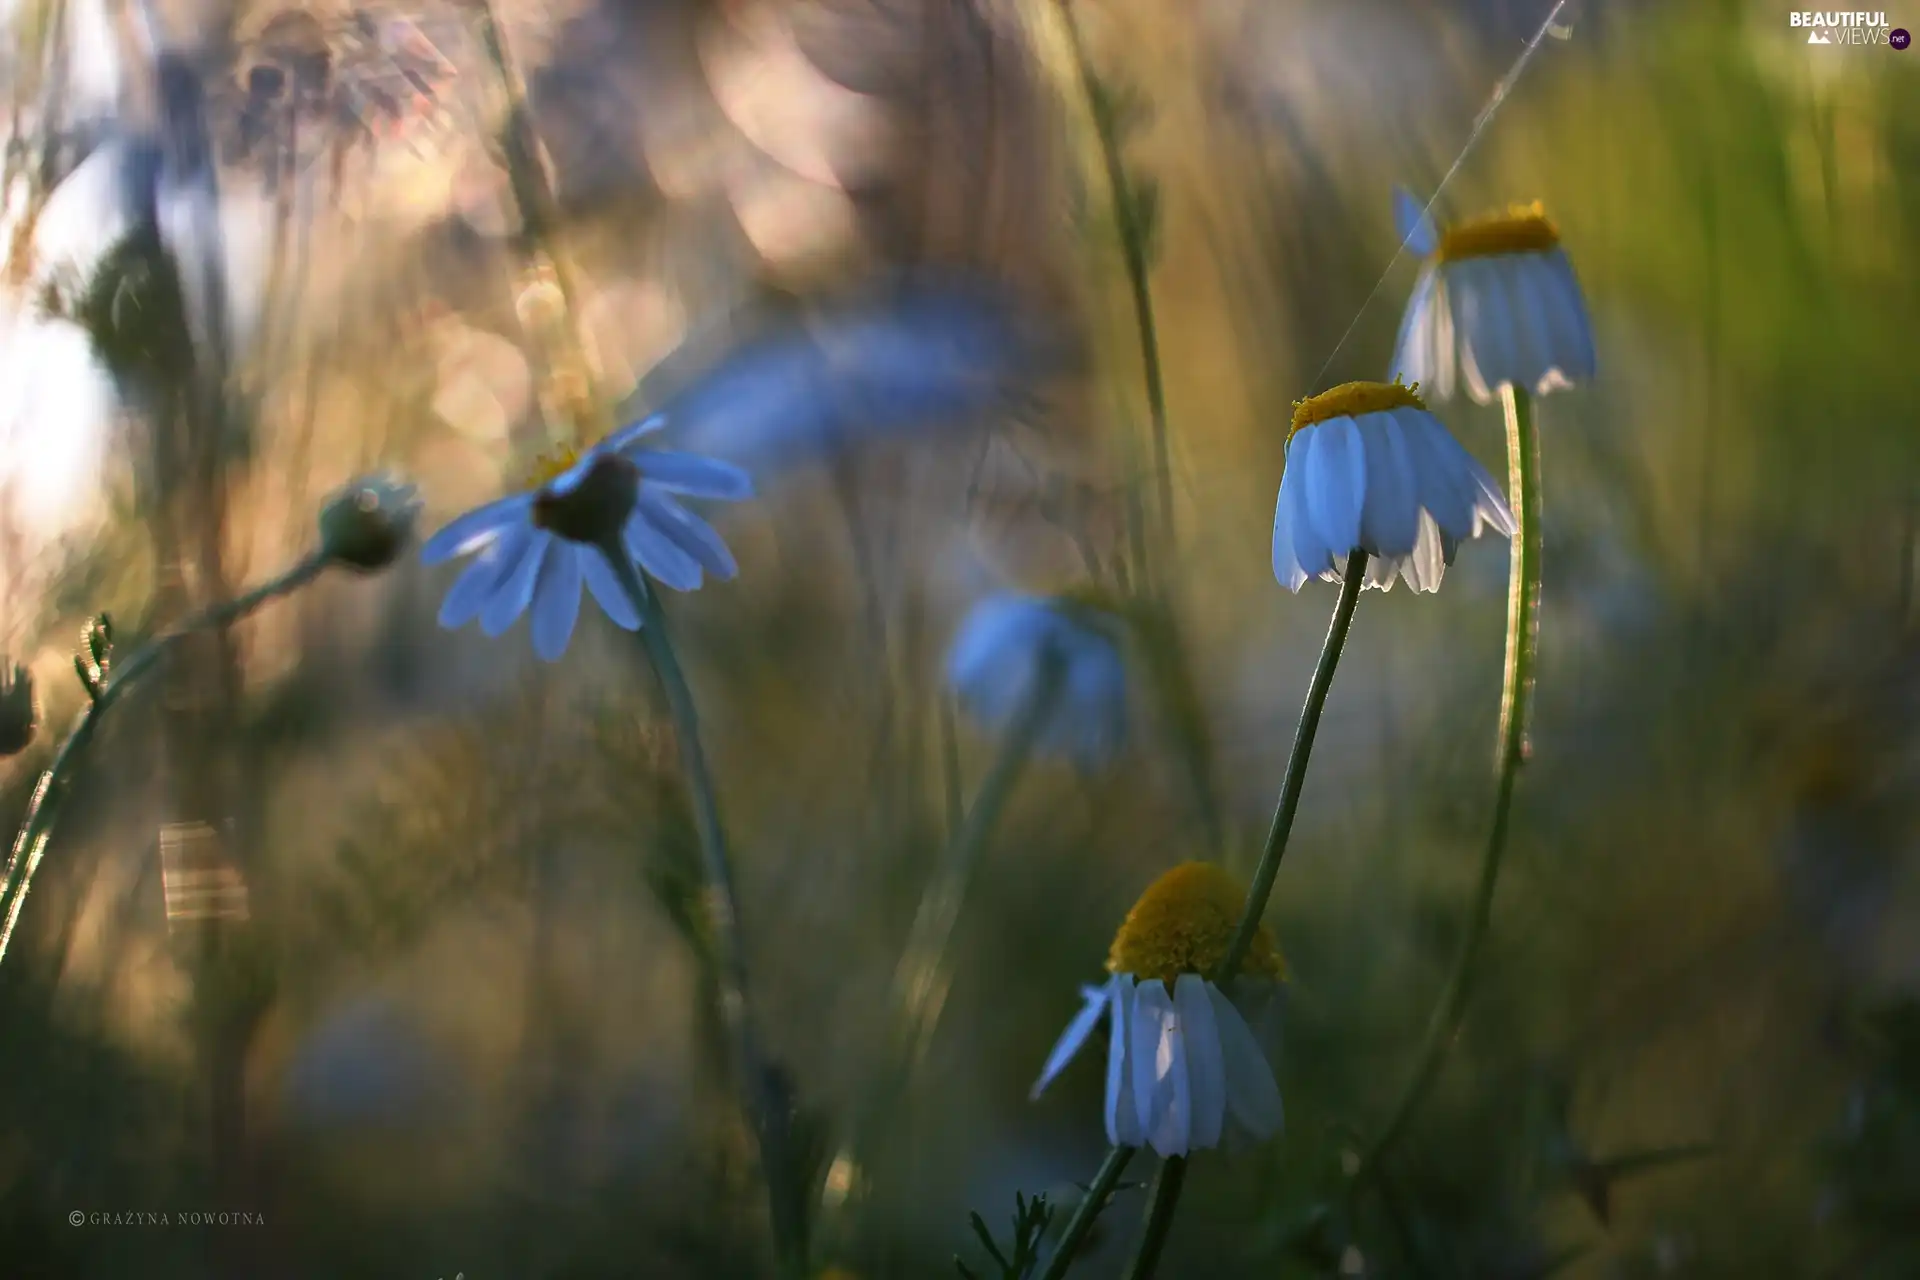 evening, chamomile, Meadow